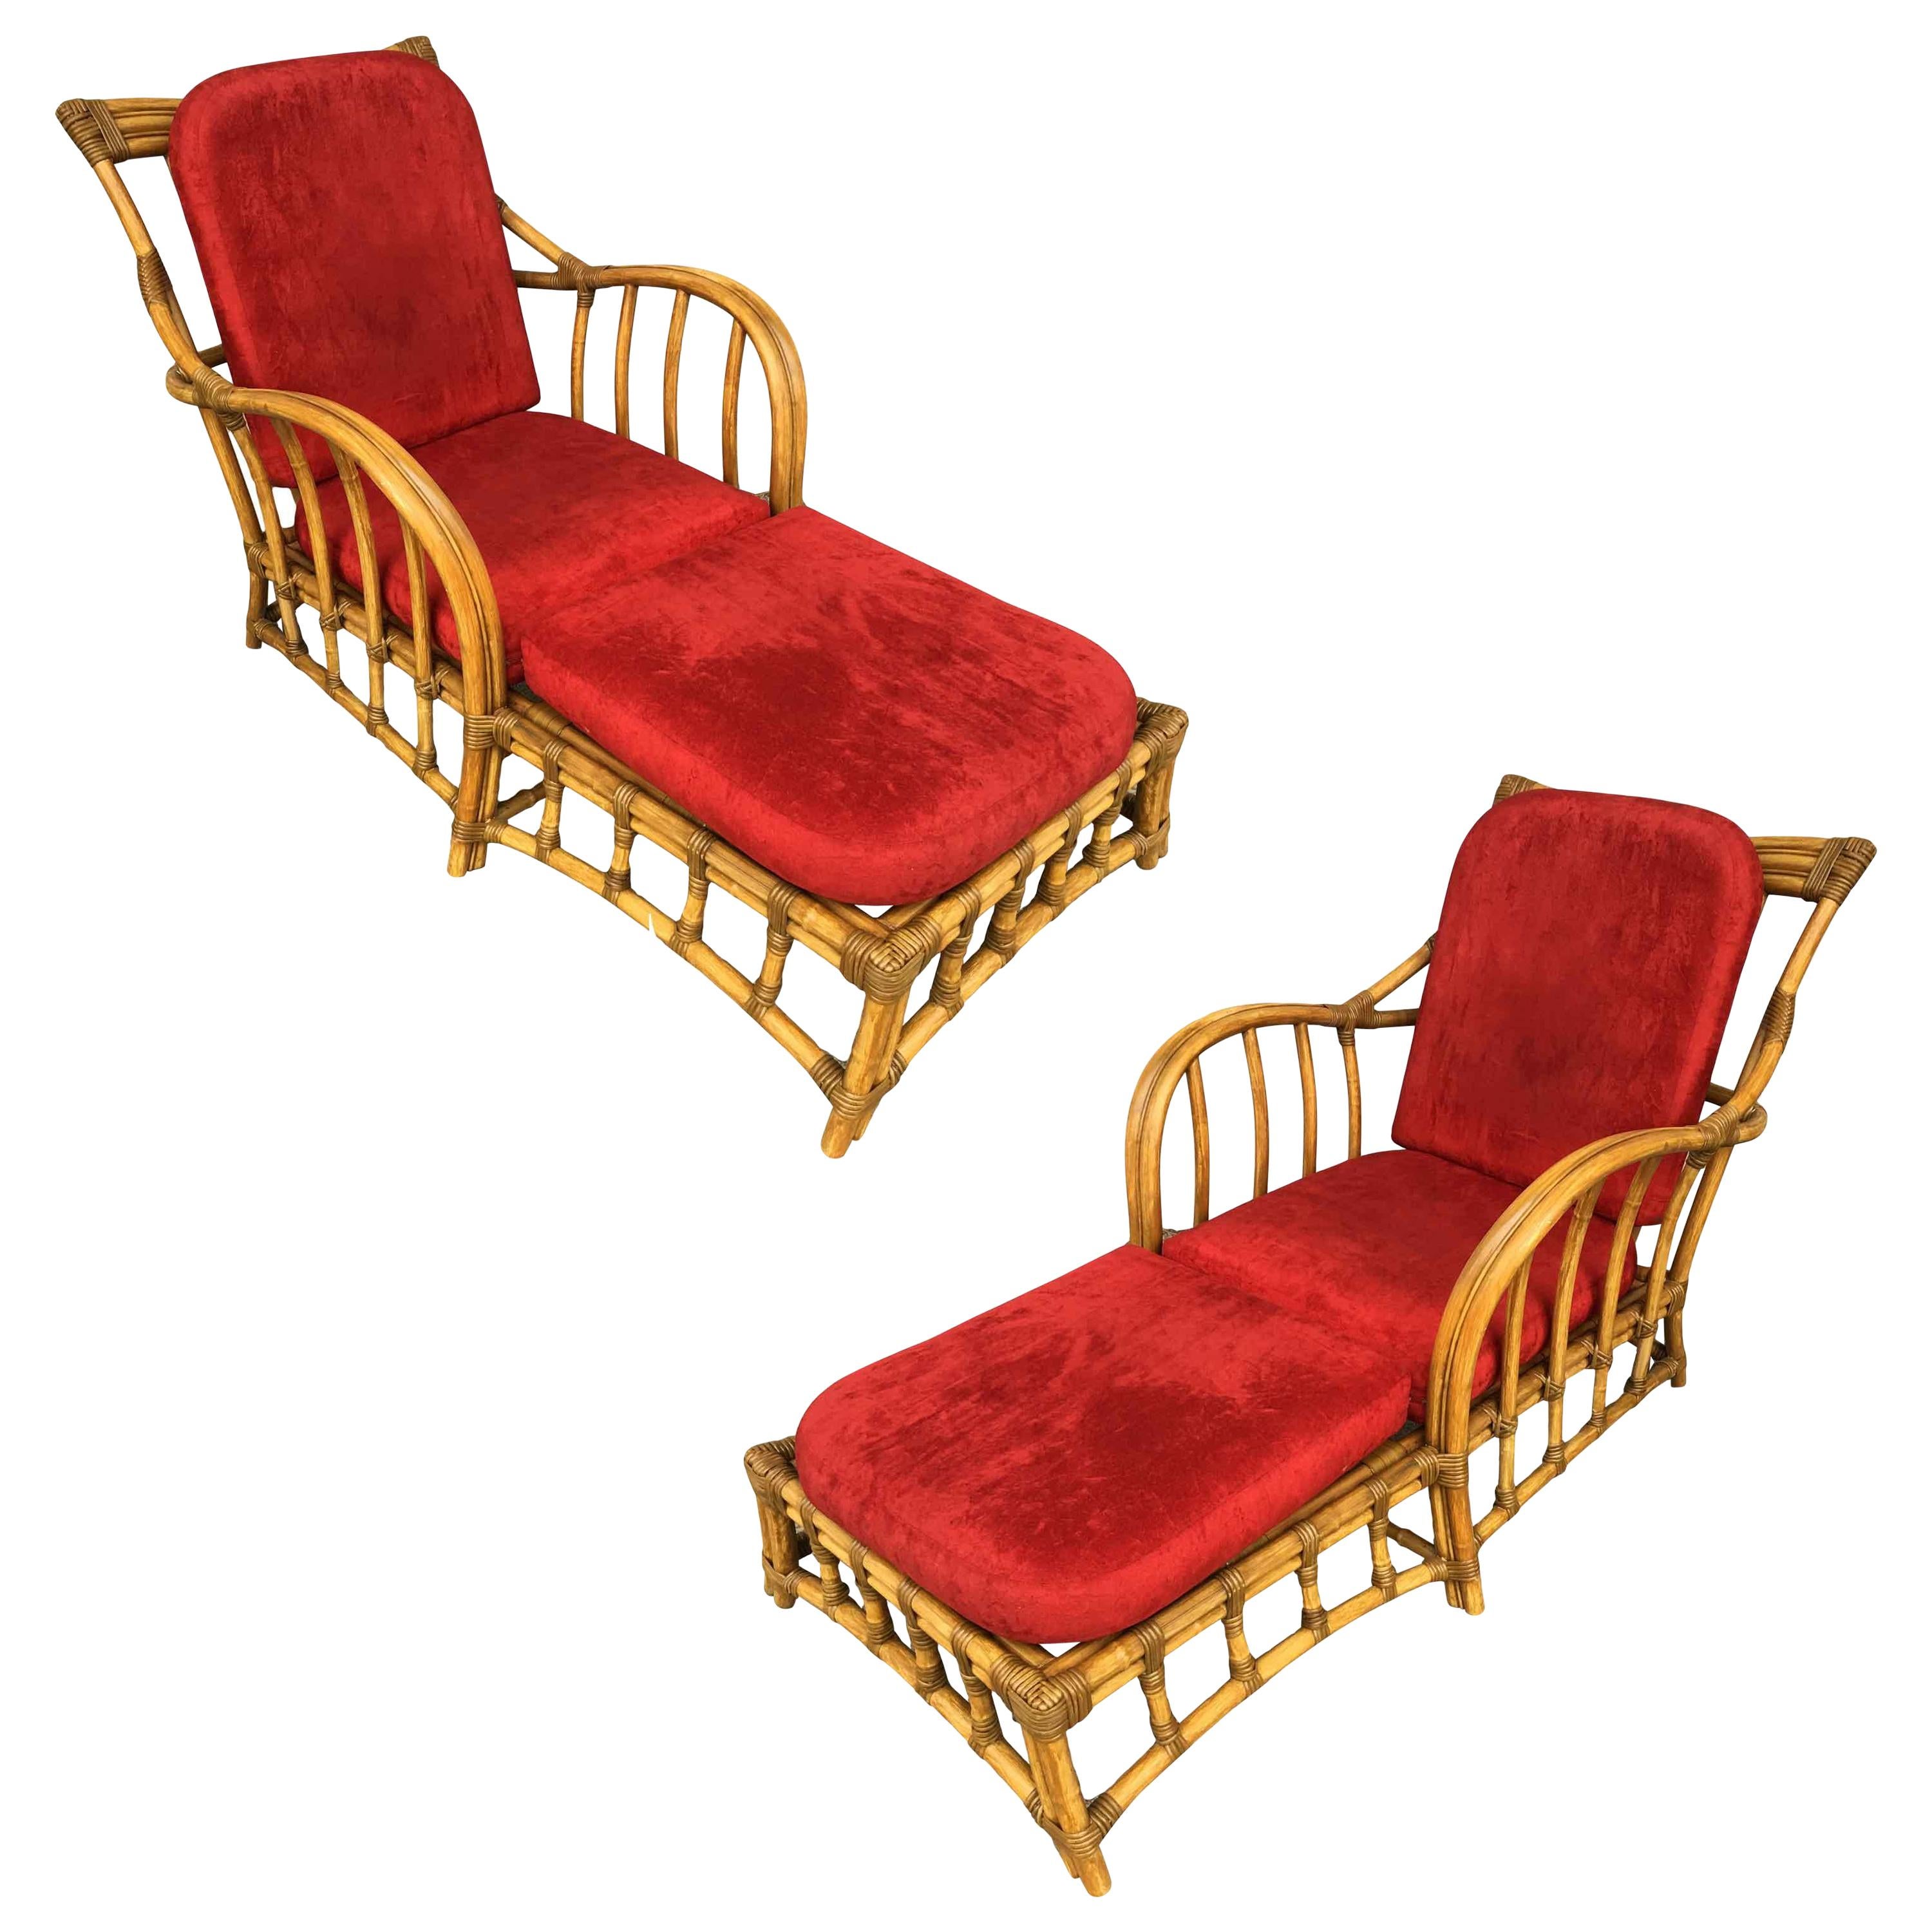 Restored Outdoor Midcentury Arched Arms Chaise Lounge Chair with Foot Rest, Pair